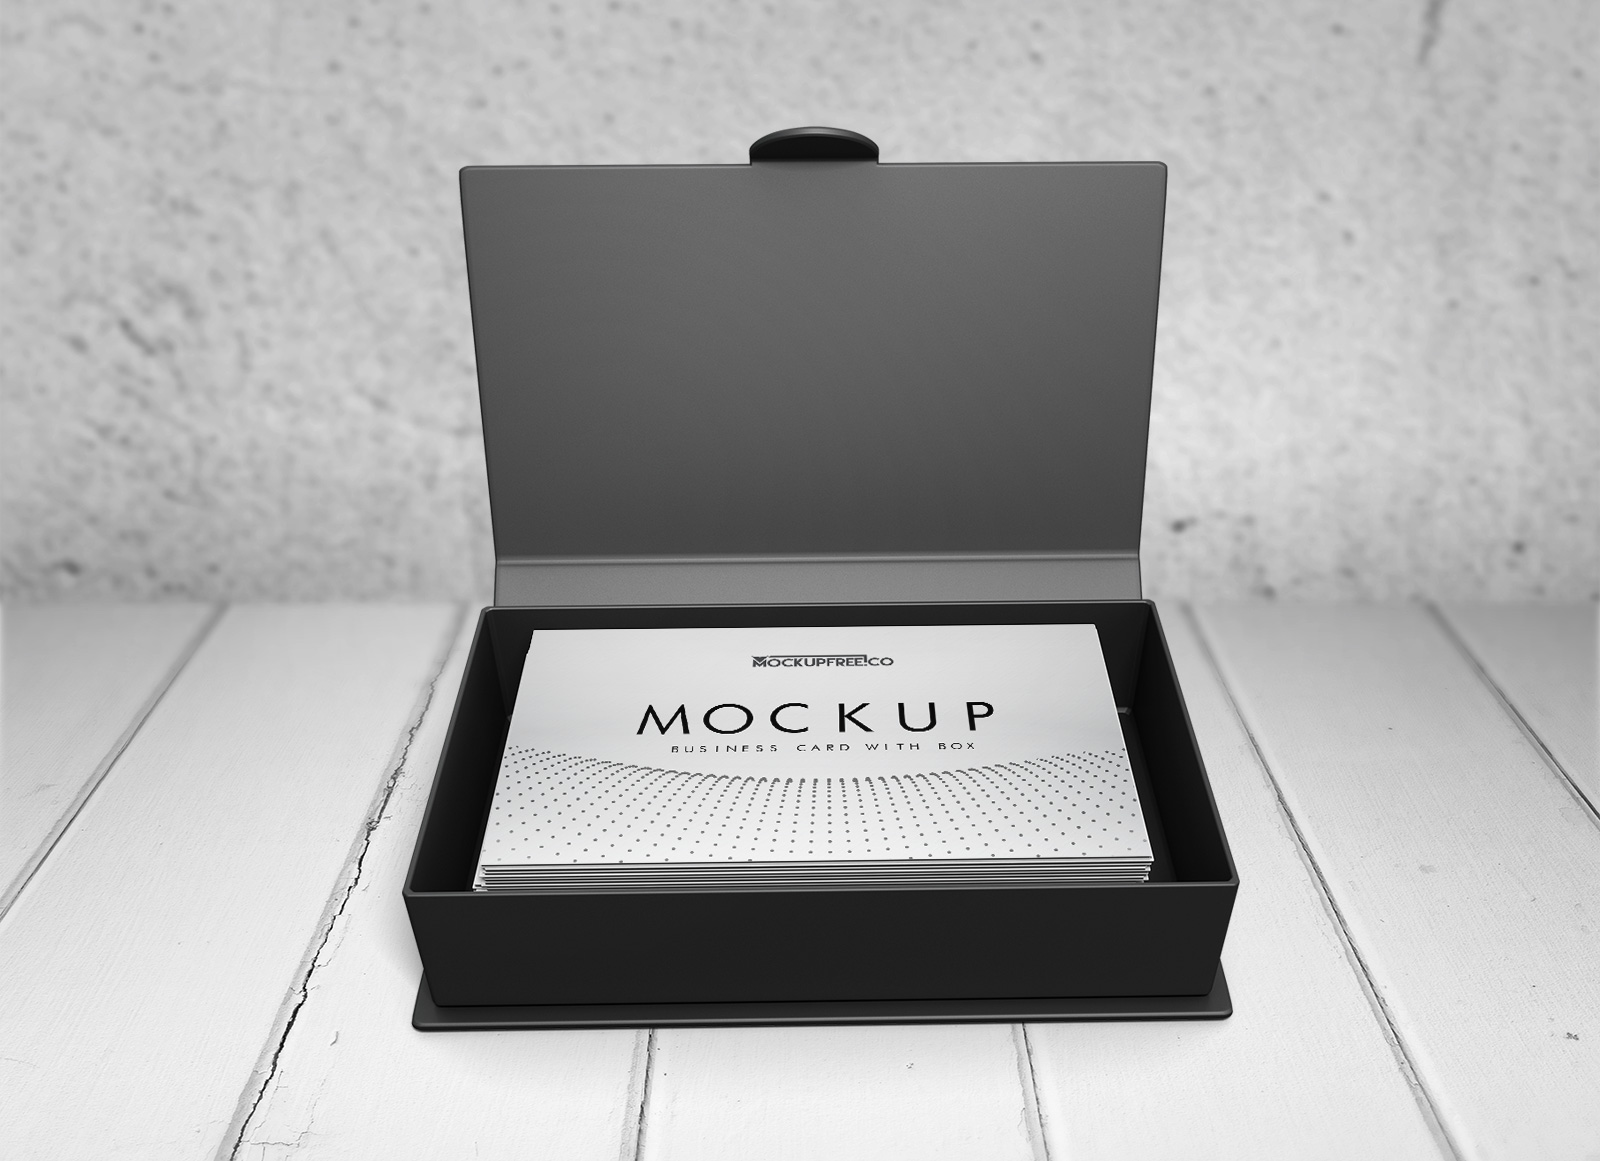 Free-Business-Card-with-Box-Mockup-PSD